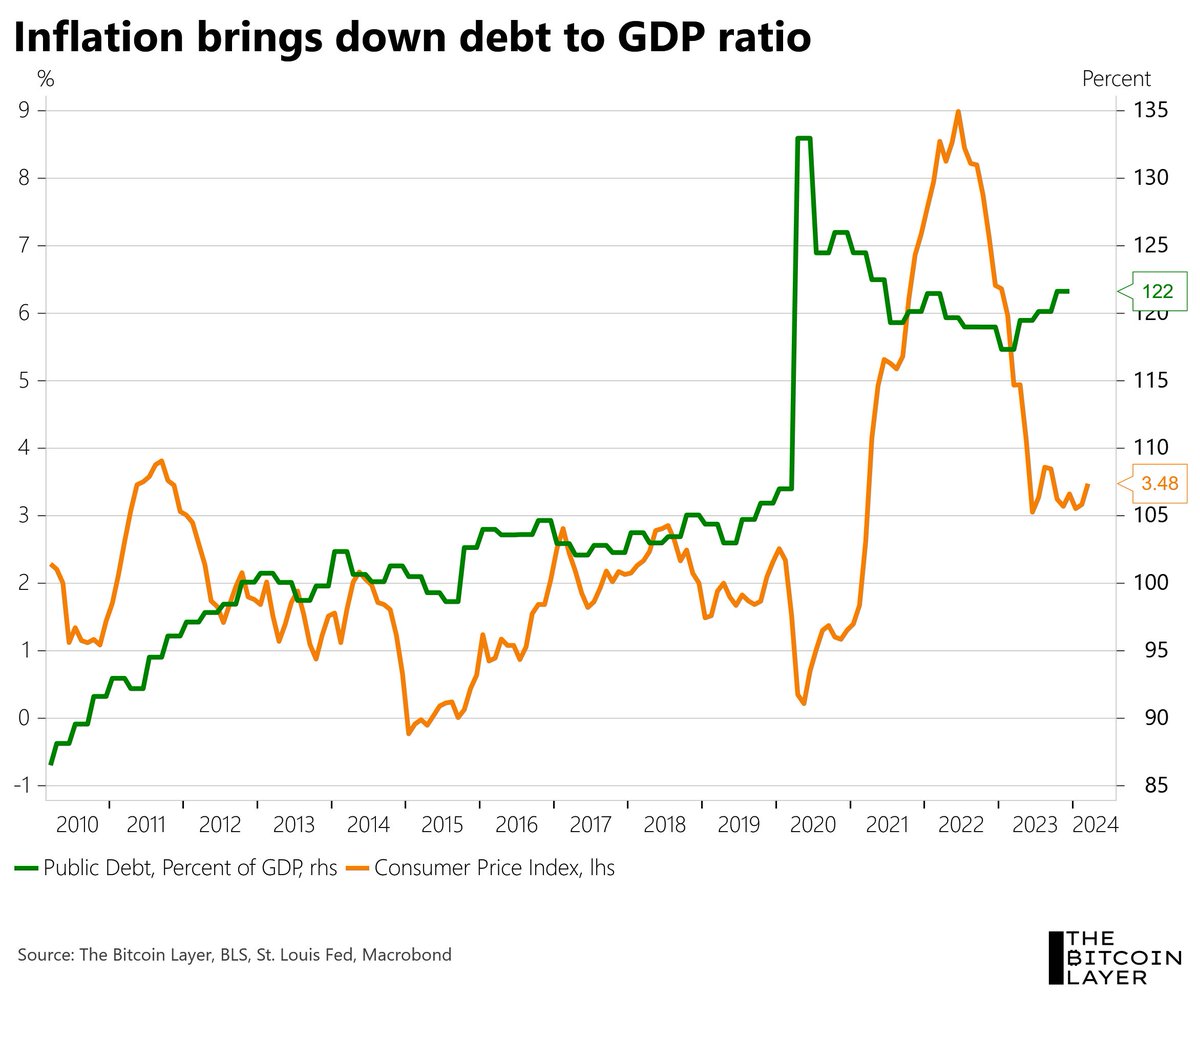 If you really think the Fed / Gov wants to fight inflation, you haven't been paying attention. They need inflation for 'Financial Repression' which basically means... They need inflation to steal your wealth and move the DEBT / GDP ratio back down, and... it's working... Per…